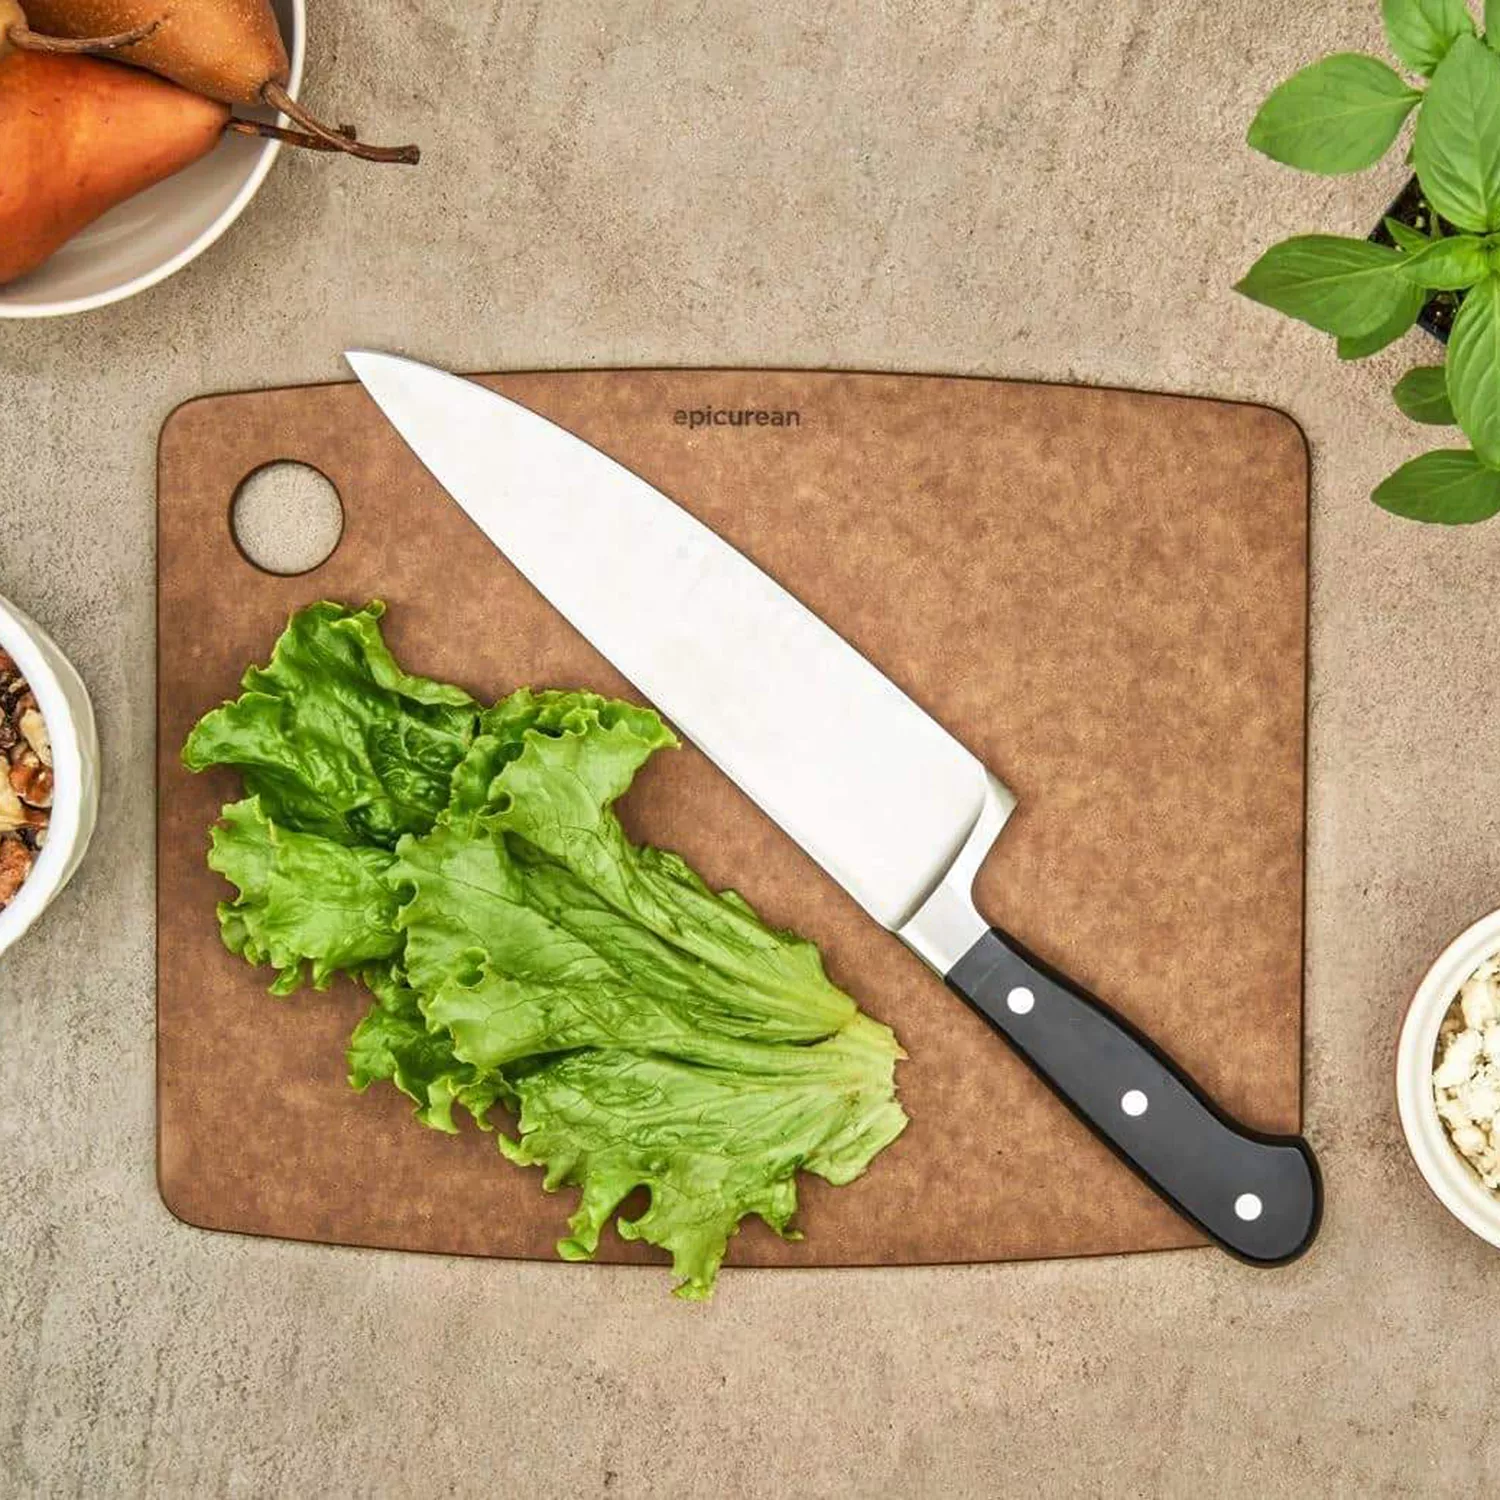 Oversized Cutting Board Easy Grip Handle Groove Non-Slip Extra Large Thick  Chopp Board Dishwasher Safe Kitchen Professional Tool